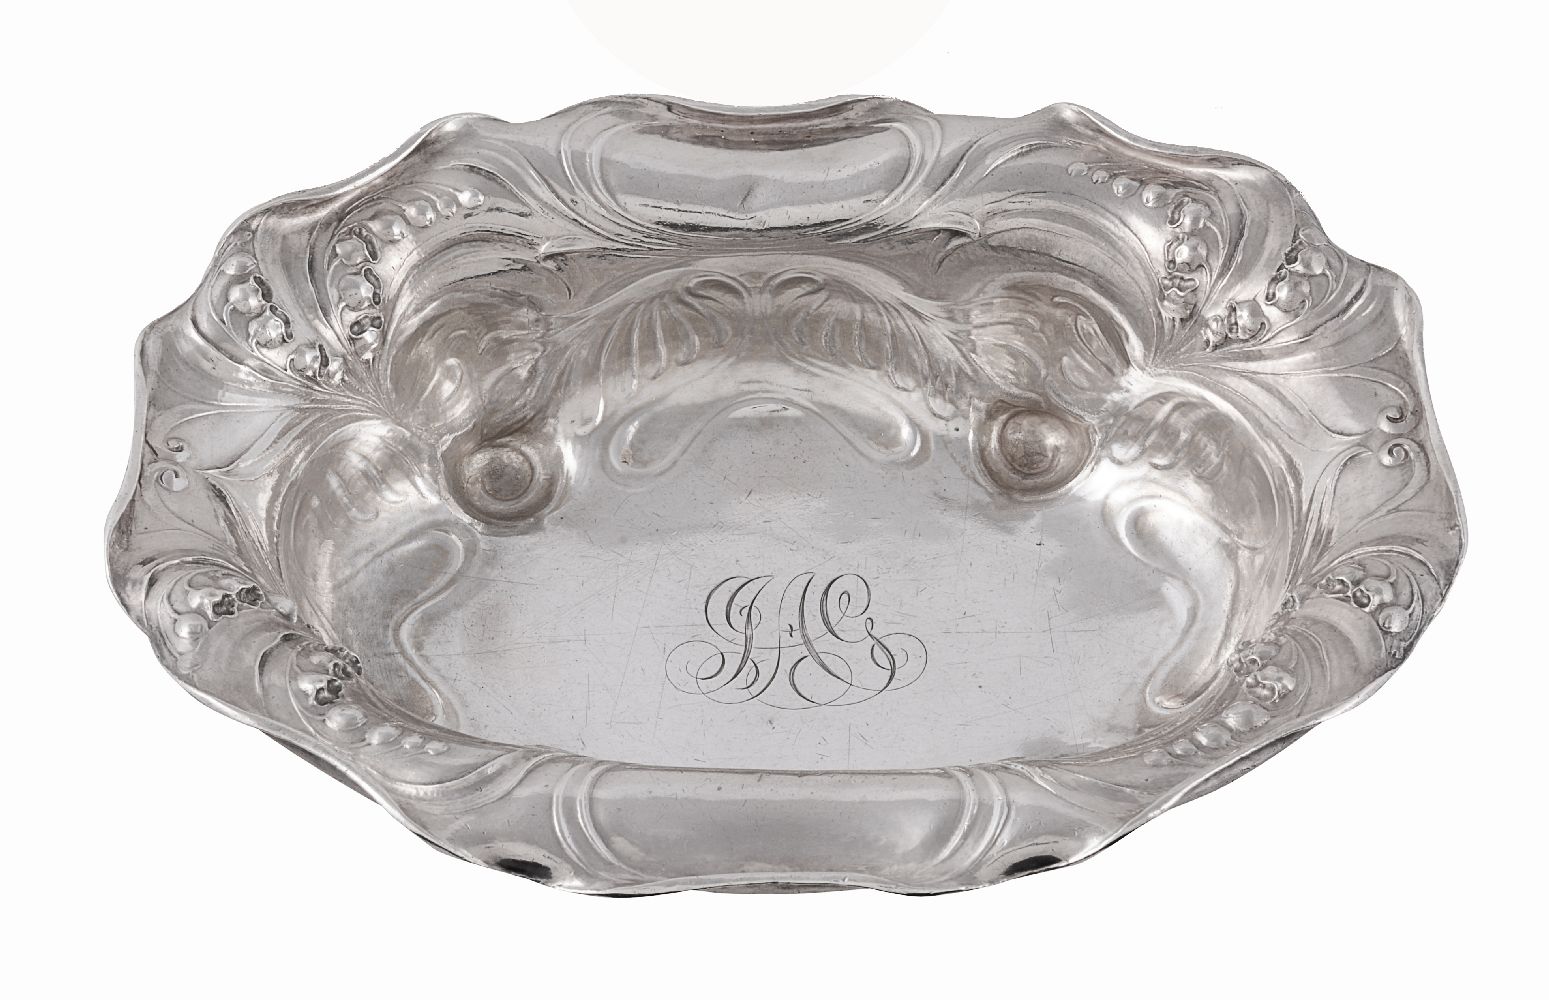 An American Art Nouveau silver shaped oval bowl by Gorham Manufacturing Co.